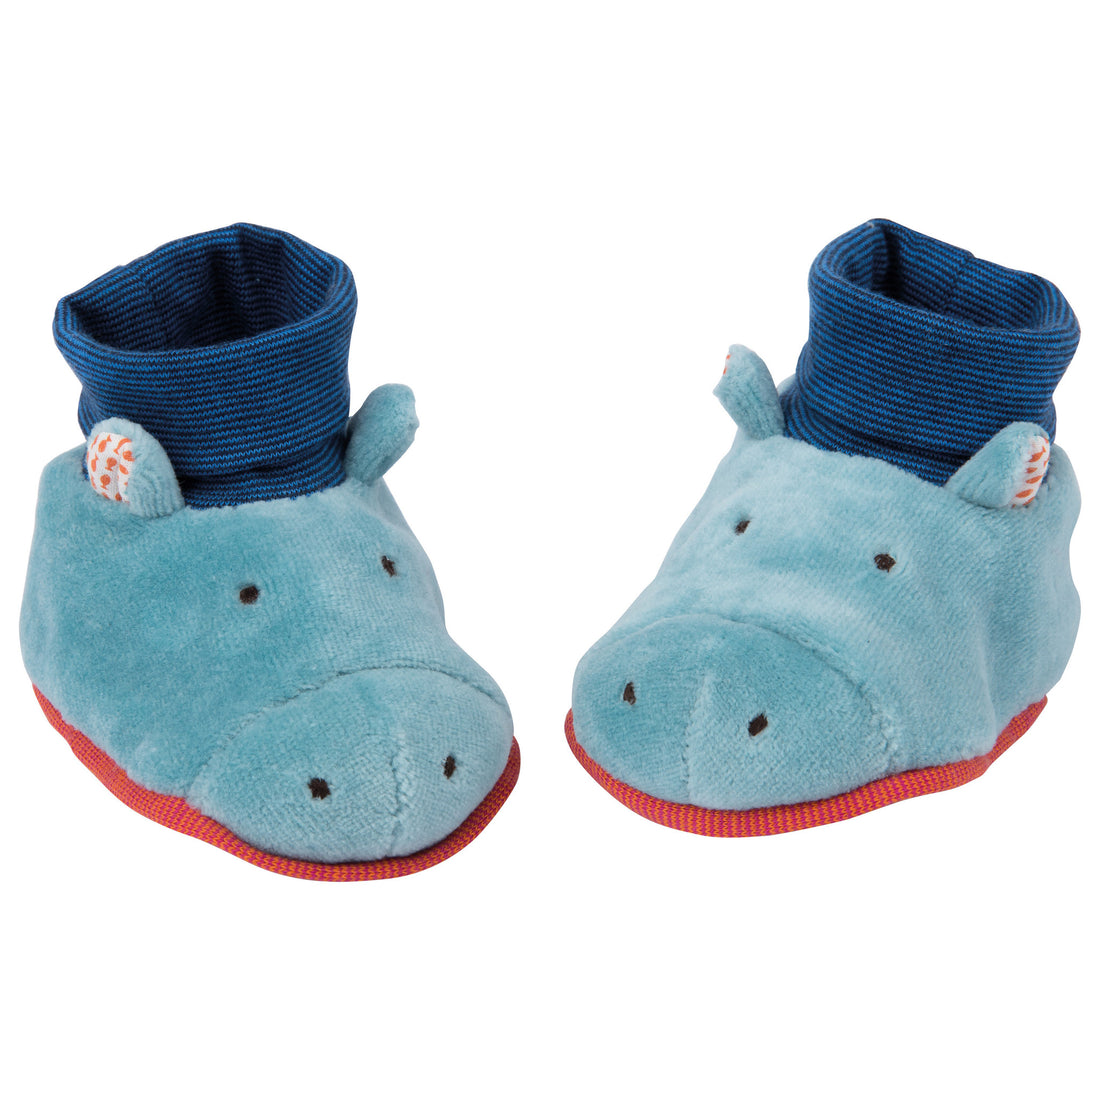 moulin-roty-hippo-baby-slippers-lpa-01